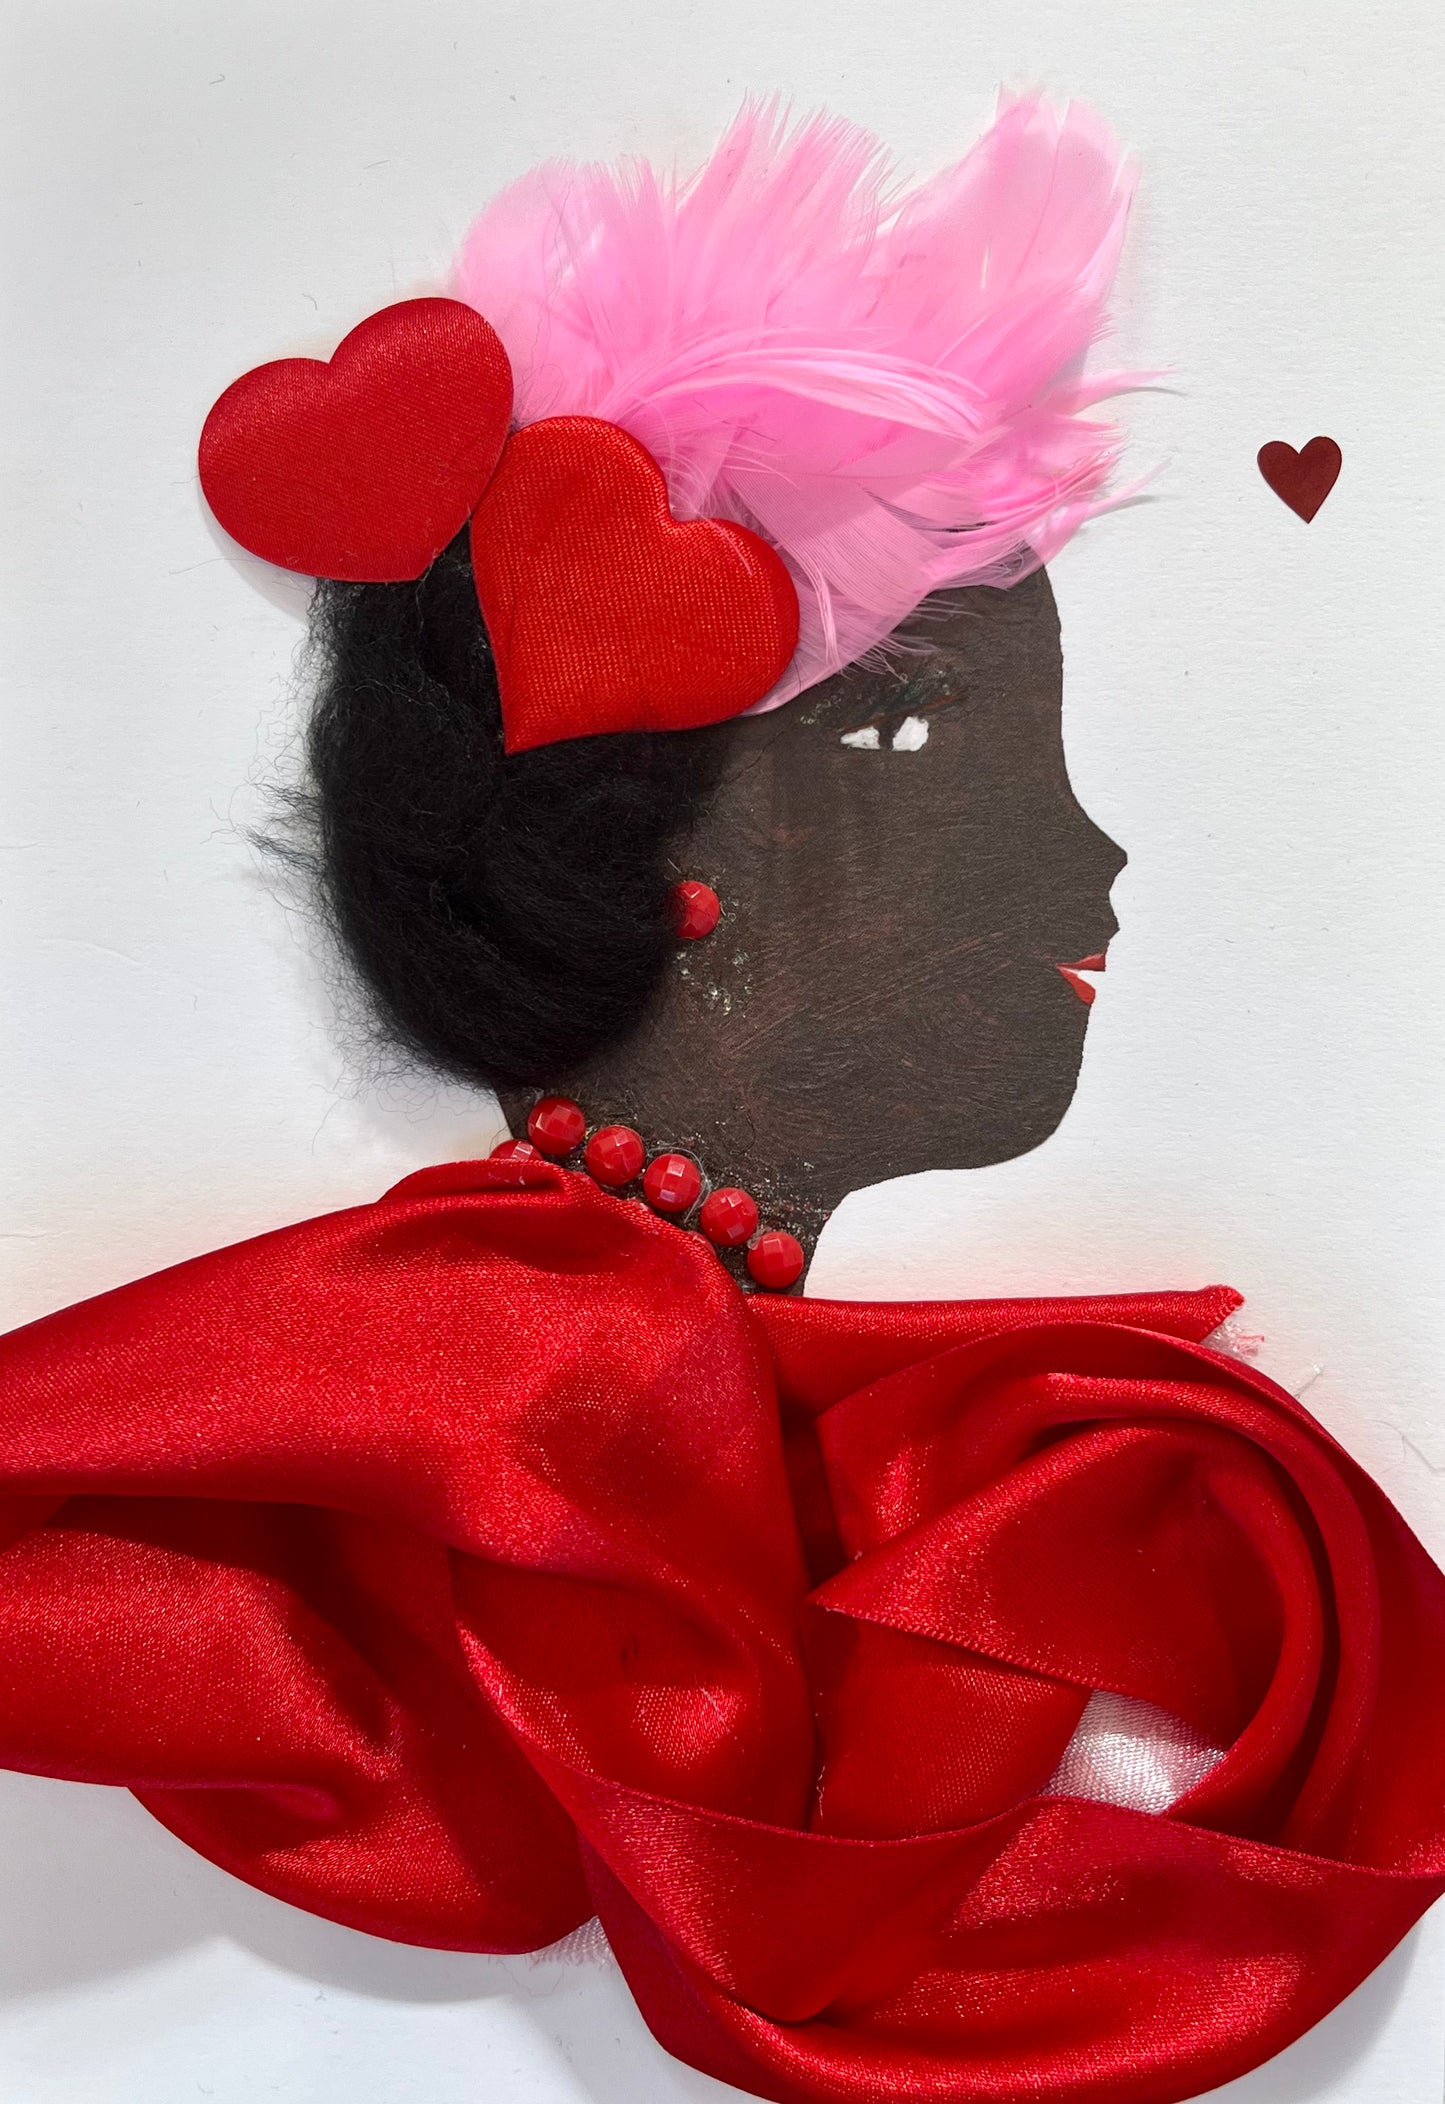 Agnes weras a red silk dress, red hearts and pink feathers in her black hair, and red earrings